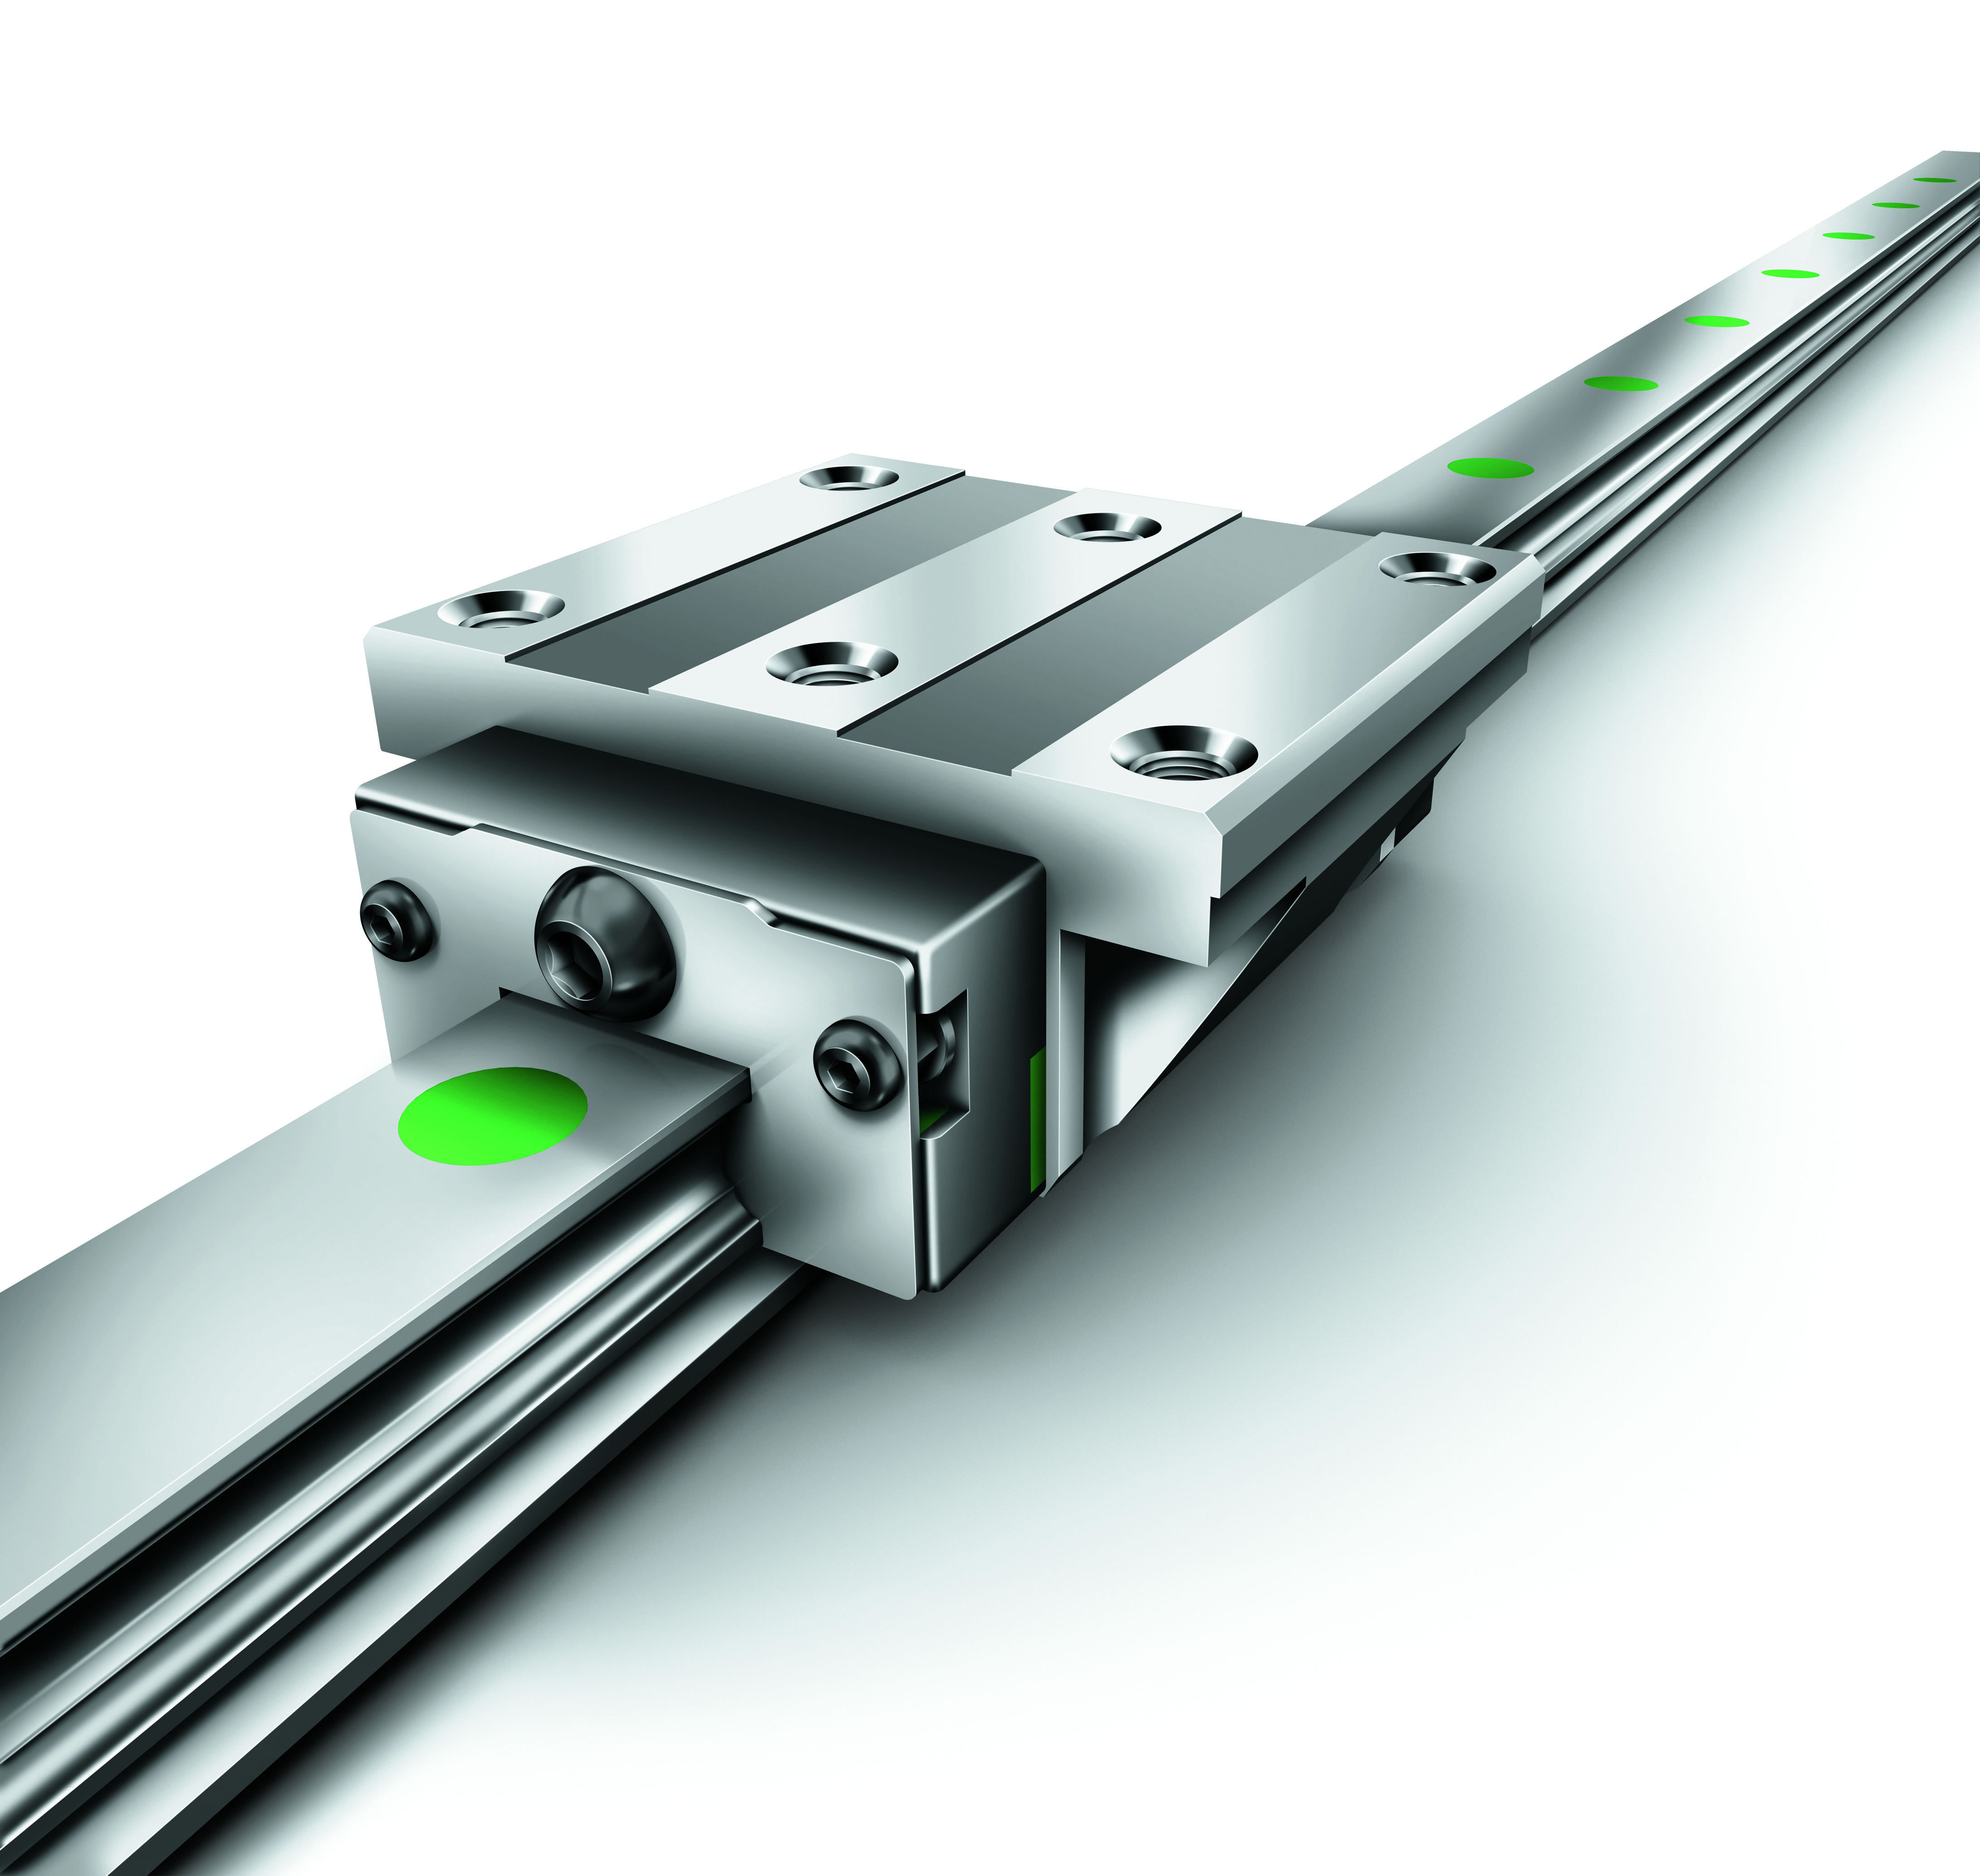 Dispelling the myths surrounding linear guidance systems | Engineer Live